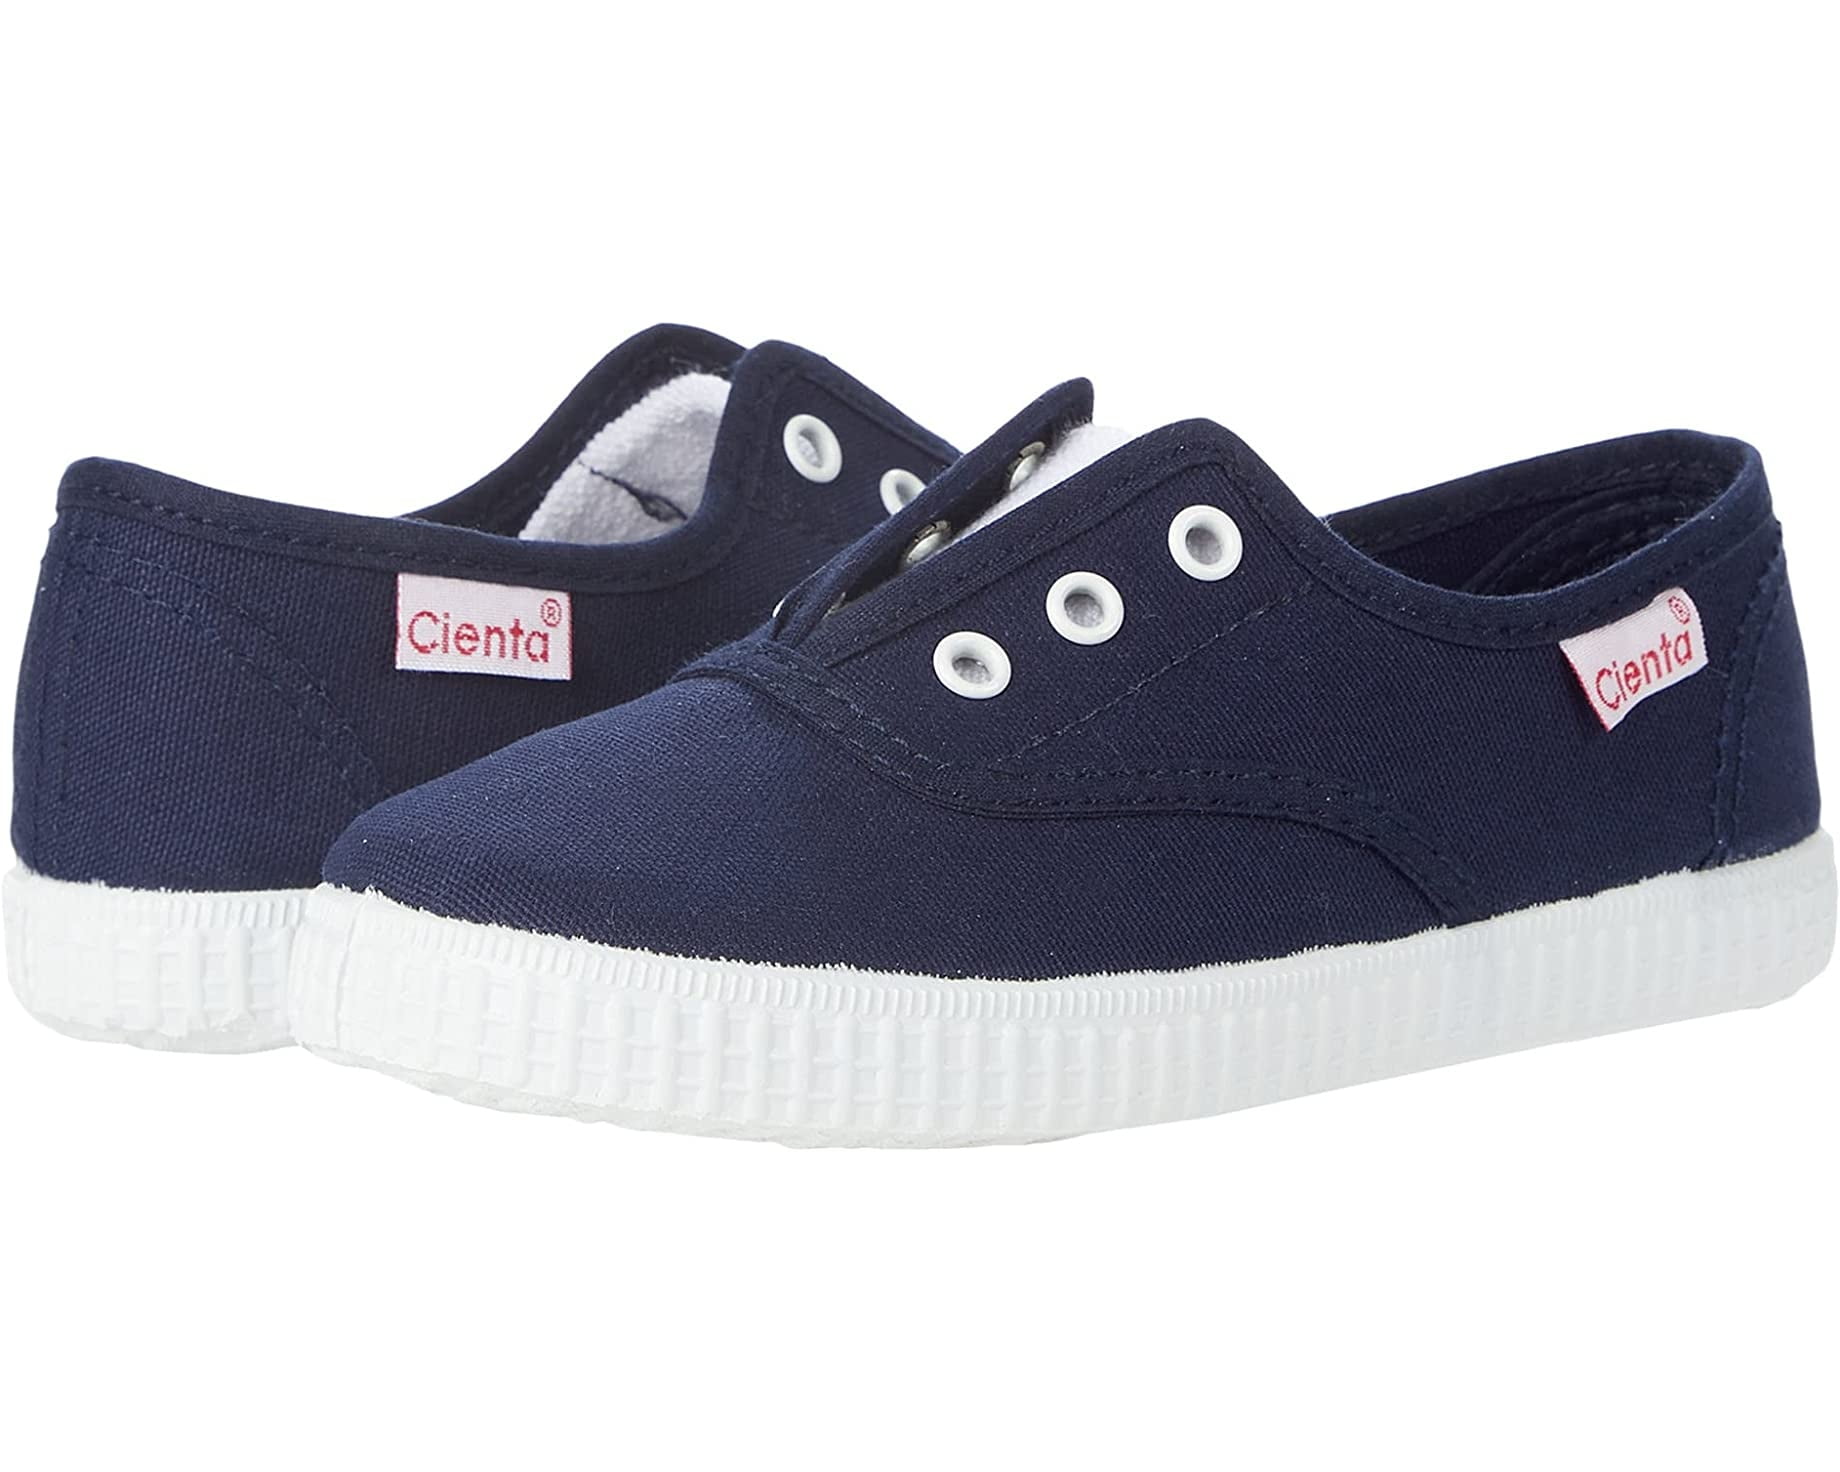 Cienta Shoes Canvas Slip On Sneakers - Azul Blue